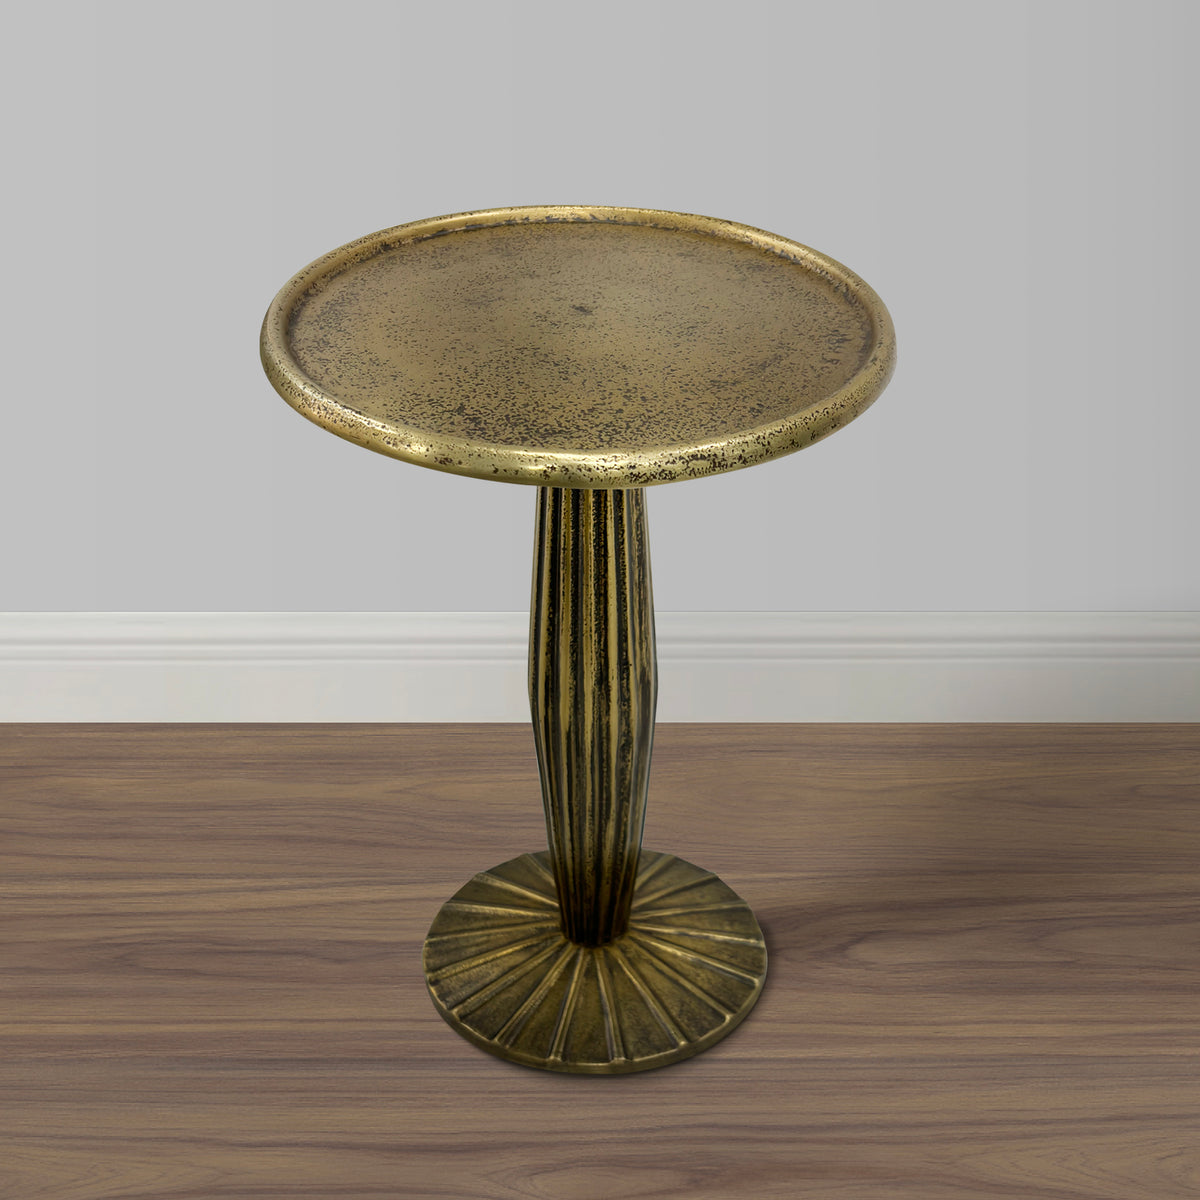 12 Inch Side End Drink Table, Fancy Fluted Base, Round Top, Antique Brass - UPT-298837